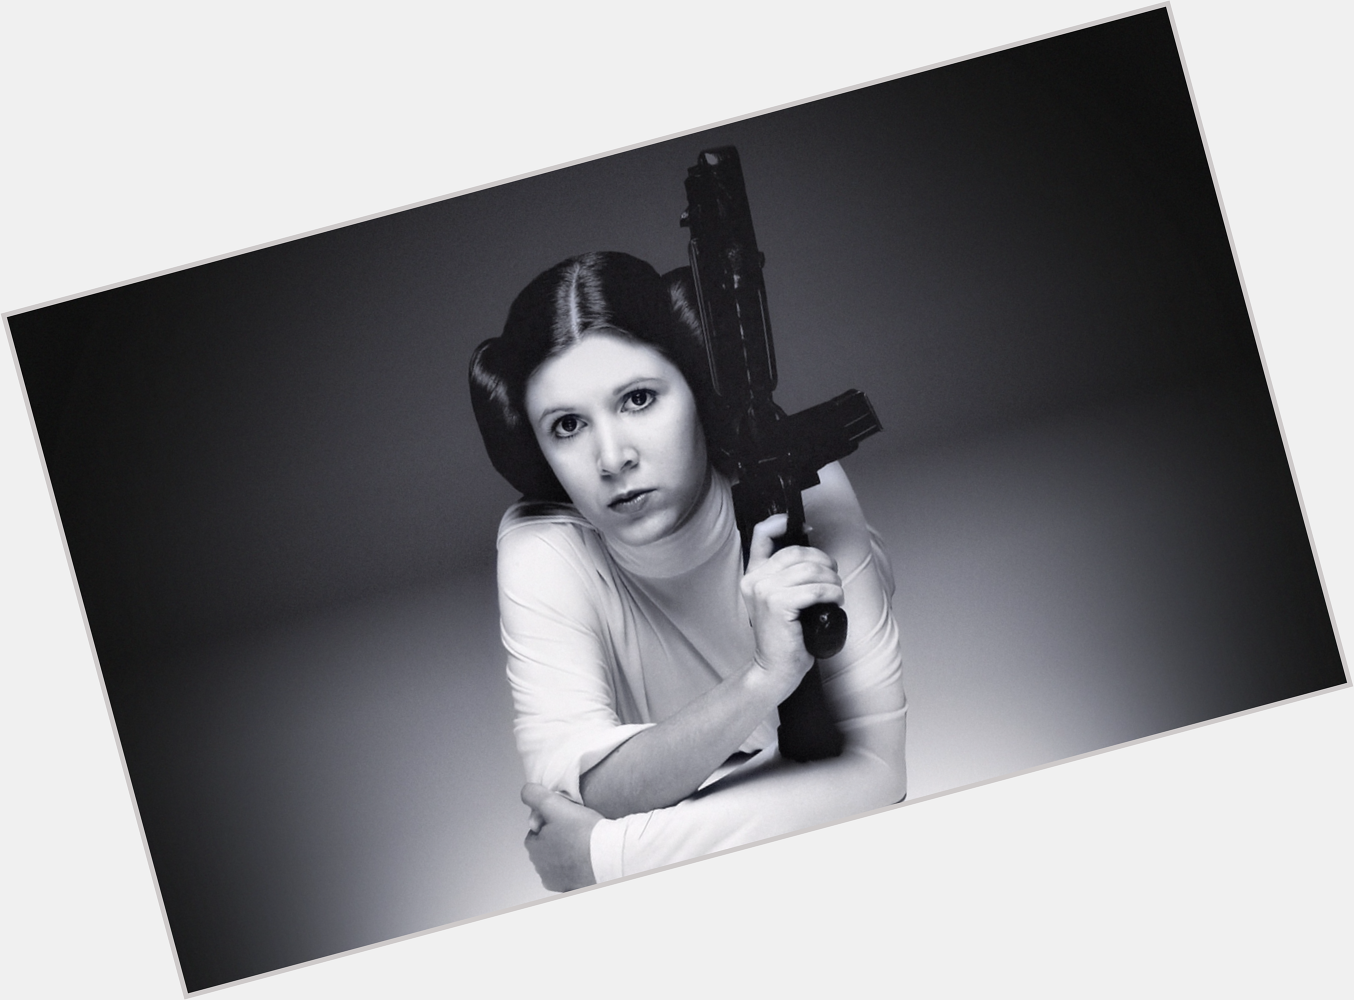 Happy Birthday Carrie Fisher. Looking forward to seeing you in December.
BornOnThisDay in 1956. 